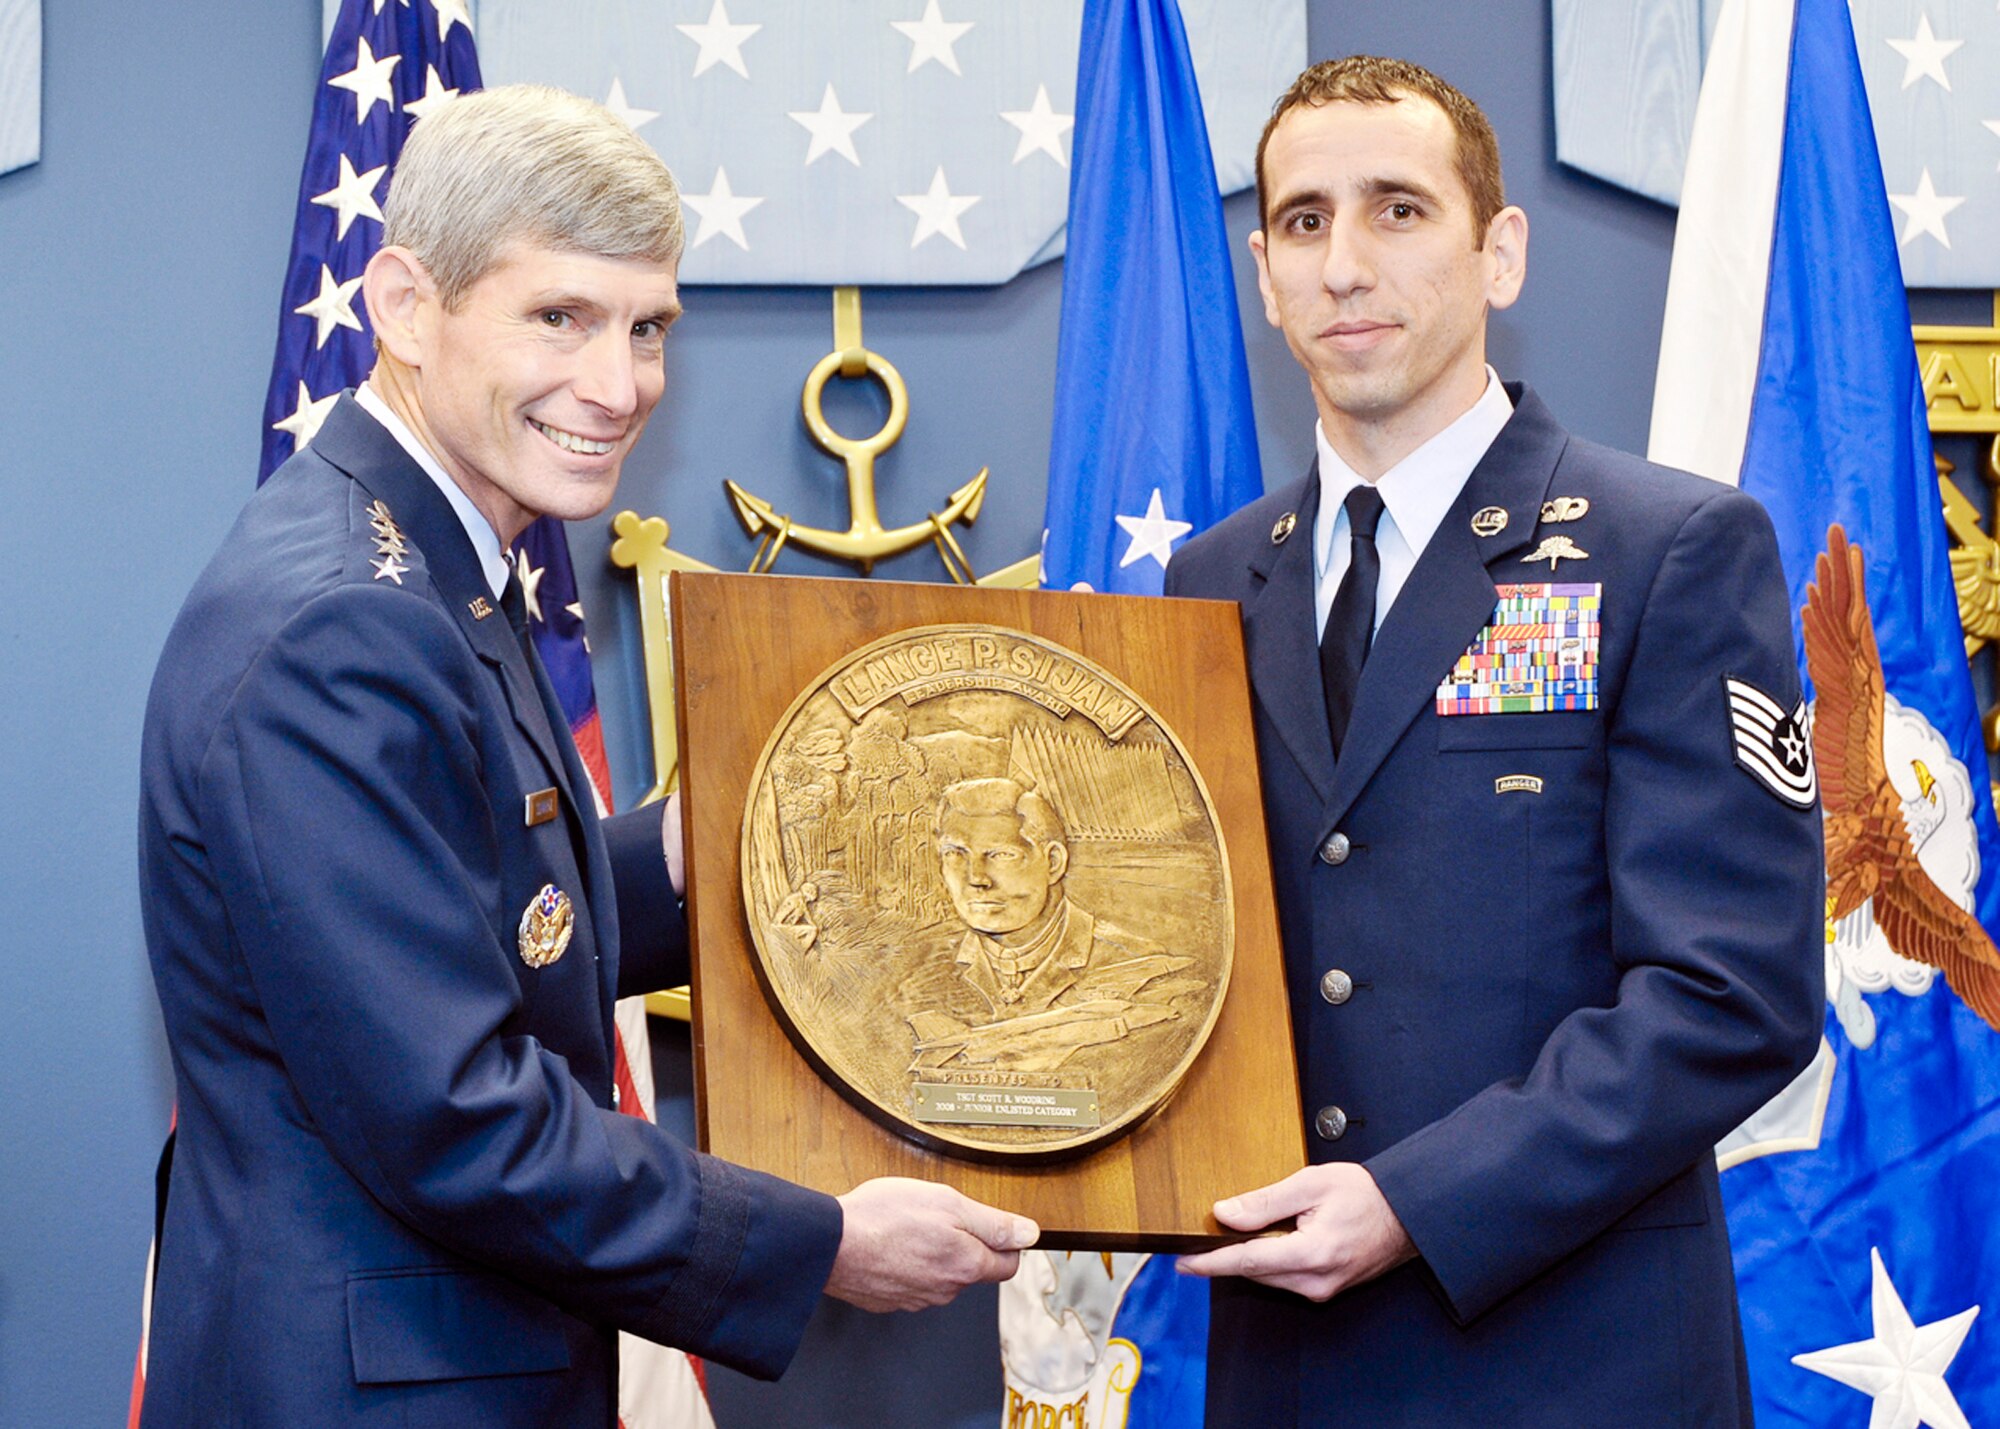 Air Force Chief of Staff Gen. Norton Schwartz presents the Capt. Lance P Sijan Air Force Leadership Award to Tech. Sgt. Scott Woodring Nov. 18, 2009.  The Sijan Award recognizes the accomplishments of officer and enlisted Airmen who have demonstrated the highest qualities of leadership in the performance of their duties and the conduct of their lives. (U.S. Air Force photo/Michael J Pausic)